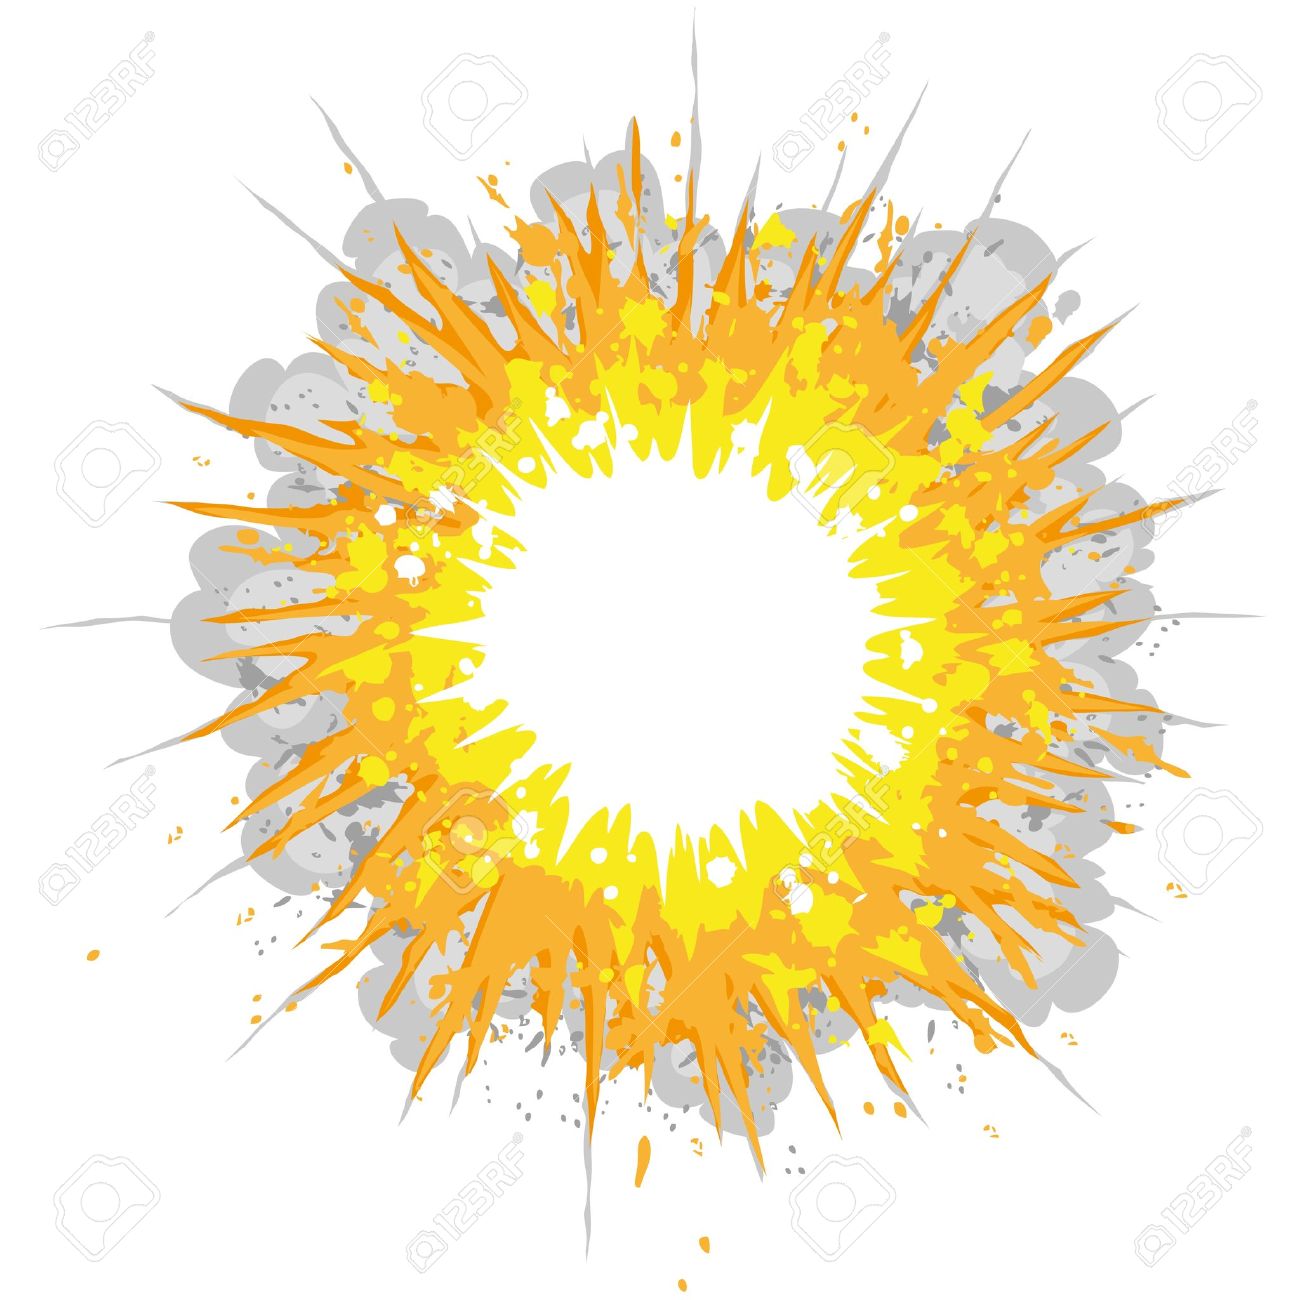 clipart of explosion - photo #36